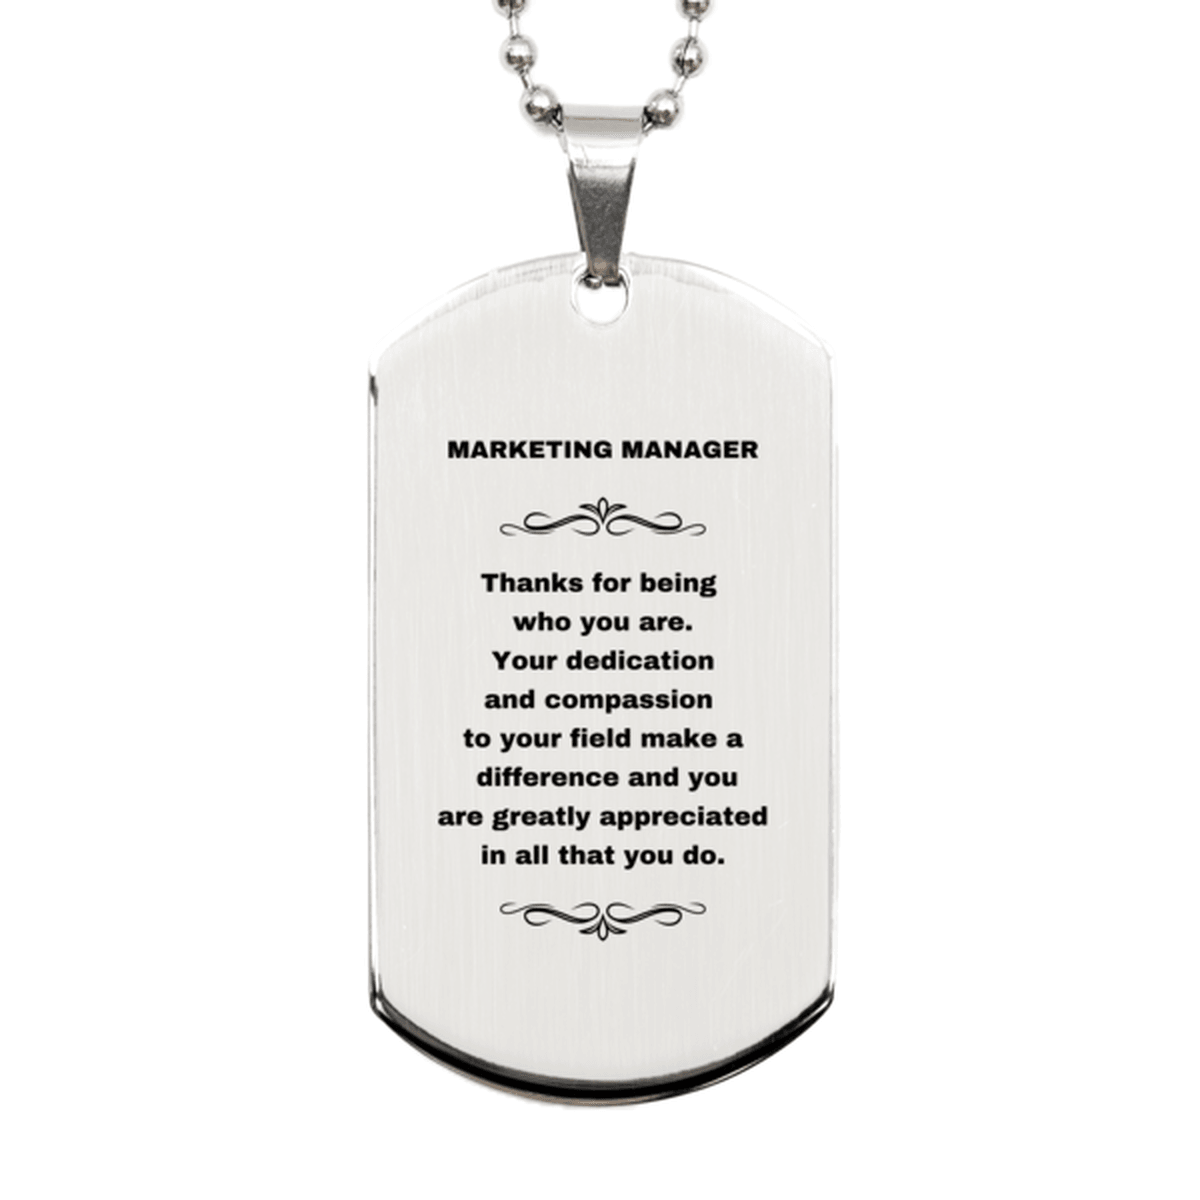 Marketing Manager Silver Dog Tag Necklace - Thanks for being who you are - Birthday Christmas Jewelry Gifts Coworkers Colleague Boss - Mallard Moon Gift Shop